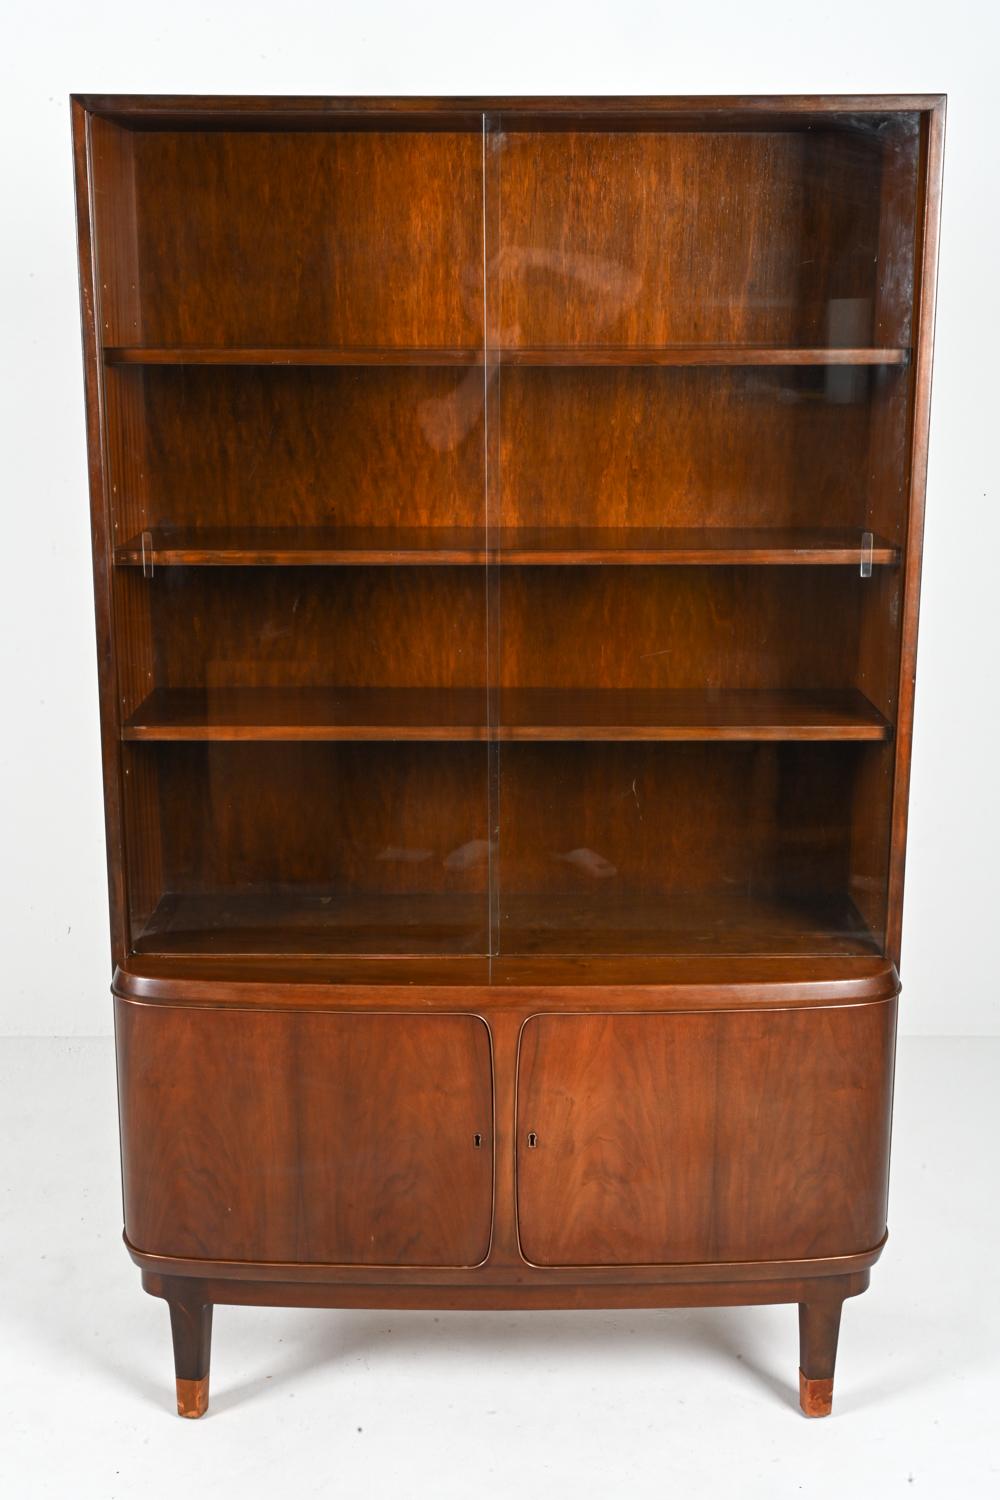 Danish Art Deco Glass-Front Bookcase or Display Cabinet by Georg Kofoed In Good Condition For Sale In Norwalk, CT